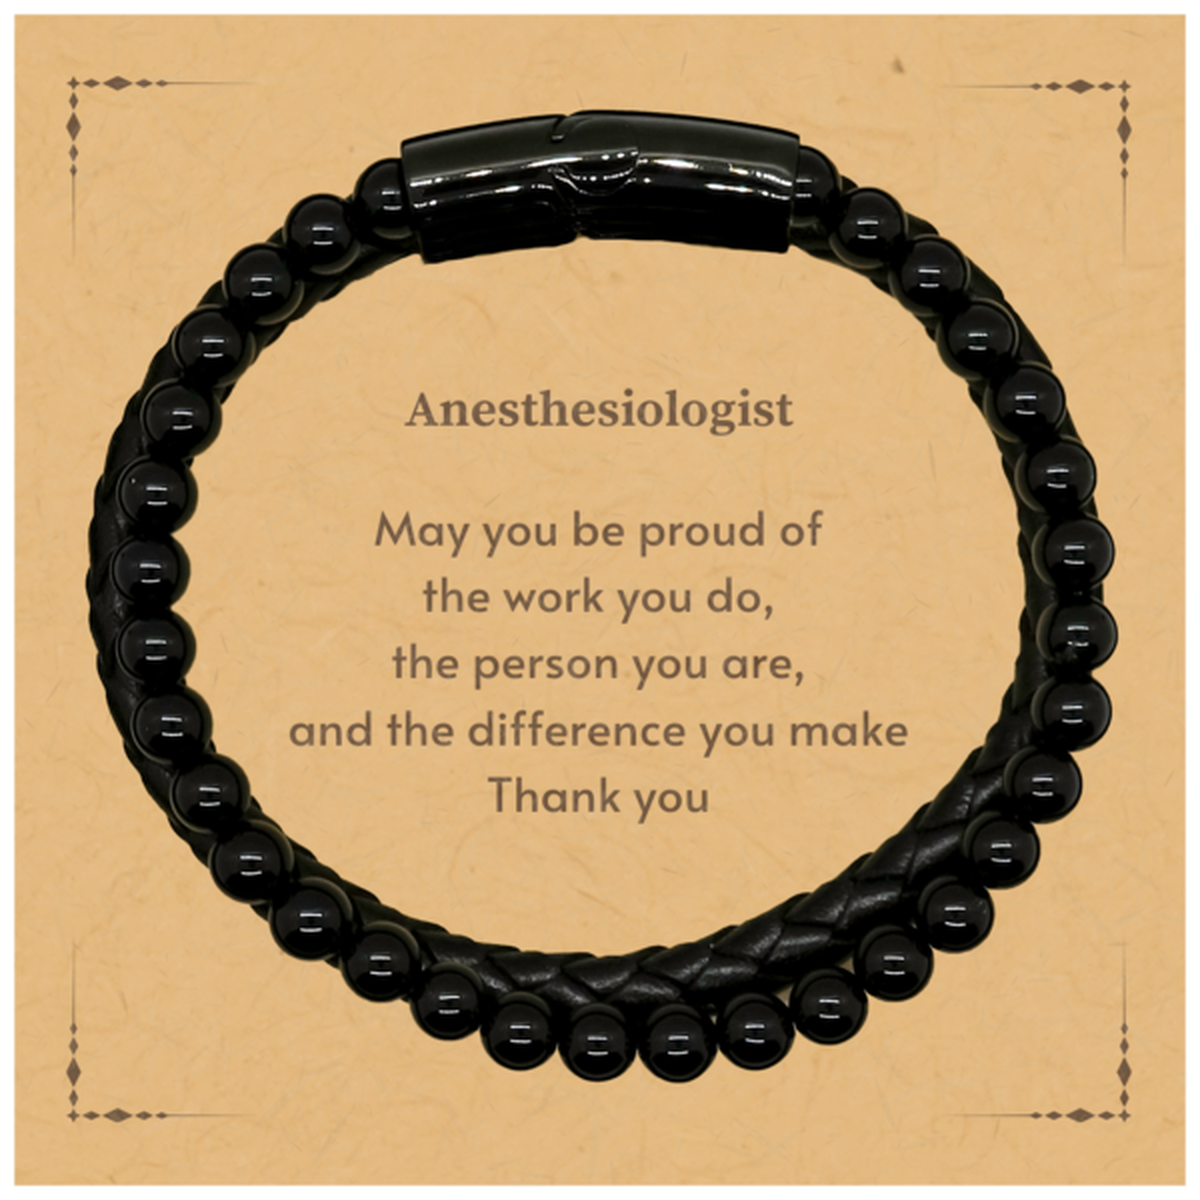 Heartwarming Stone Leather Bracelets Retirement Coworkers Gifts for Anesthesiologist, Anesthesiologist May You be proud of the work you do, the person you are Gifts for Boss Men Women Friends